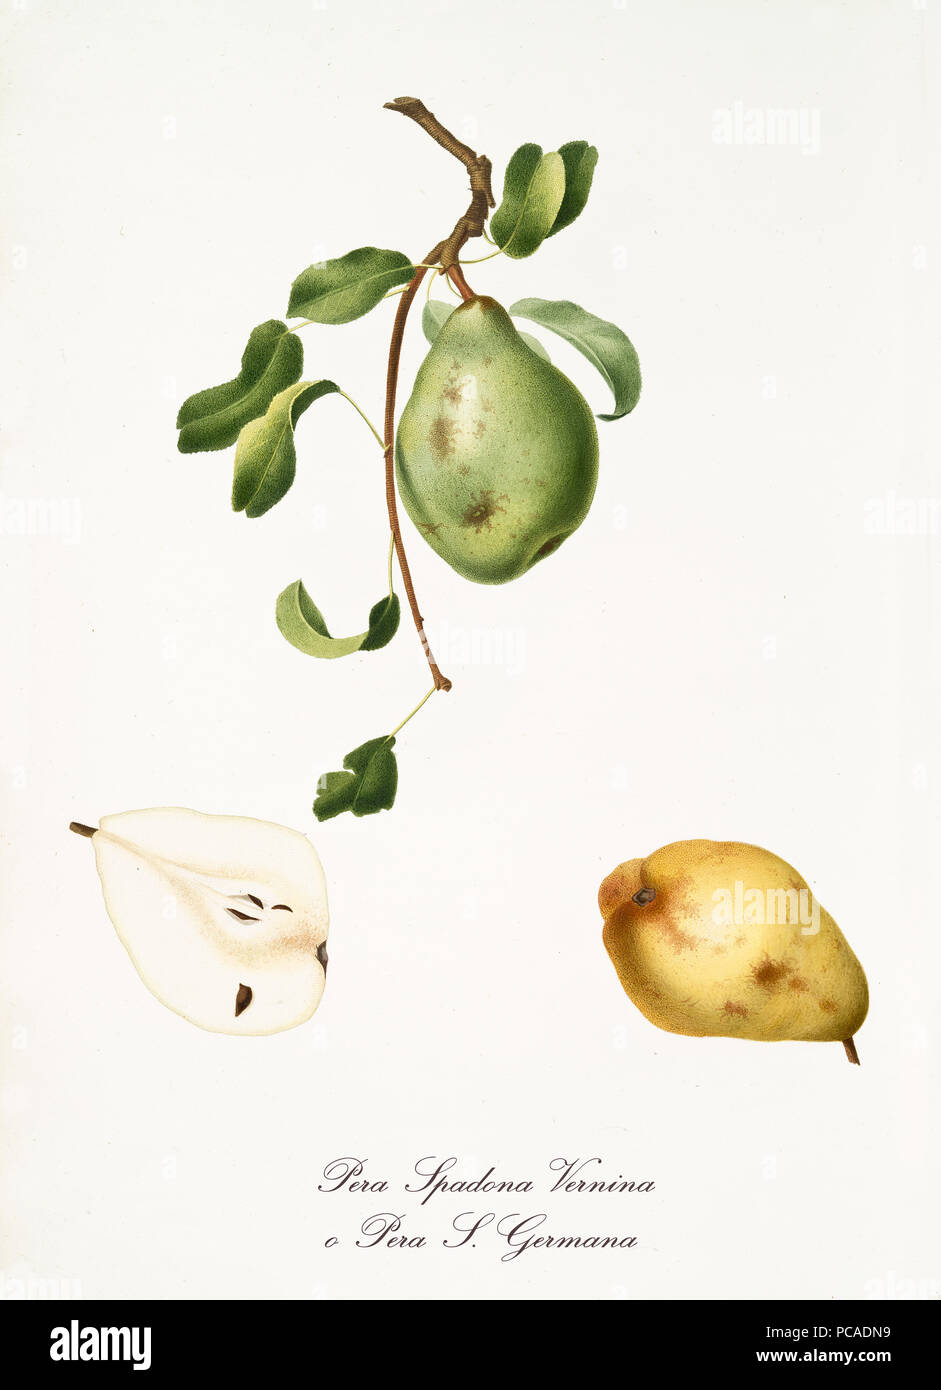 Single green pear with a little part of branch and leaves and isolated yellow pear and fruit section on white background. Old botanical detailed illustration by Giorgio Gallesio on 1817, 1839 Stock Photo